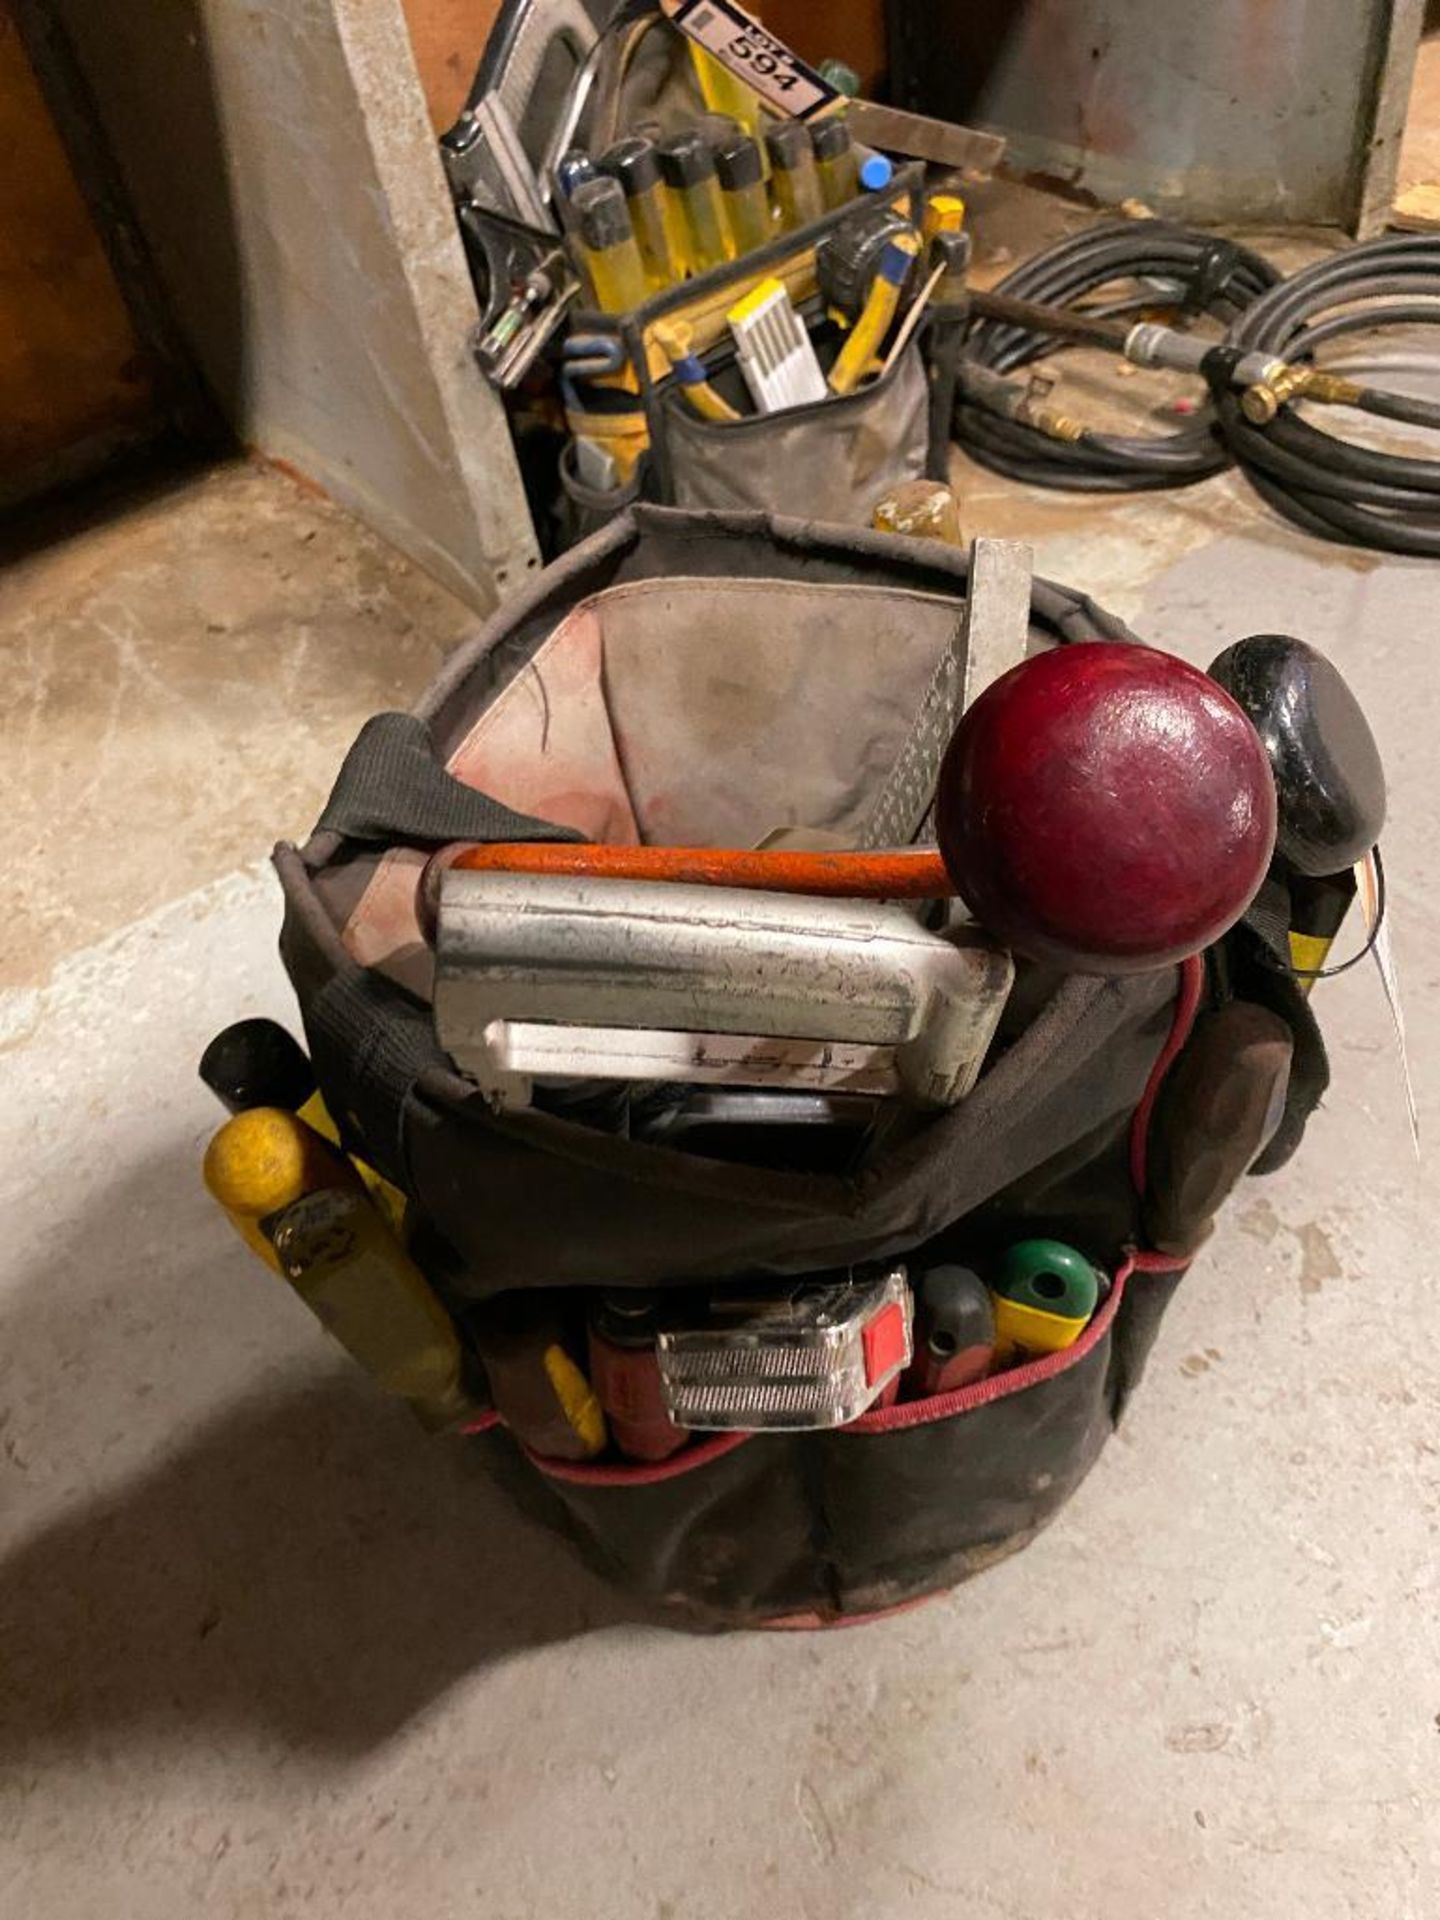 Electricians Tool Bag w/ Screw Drivers, Square, Tape Measure, Saw, Hammer, etc. - Image 2 of 4